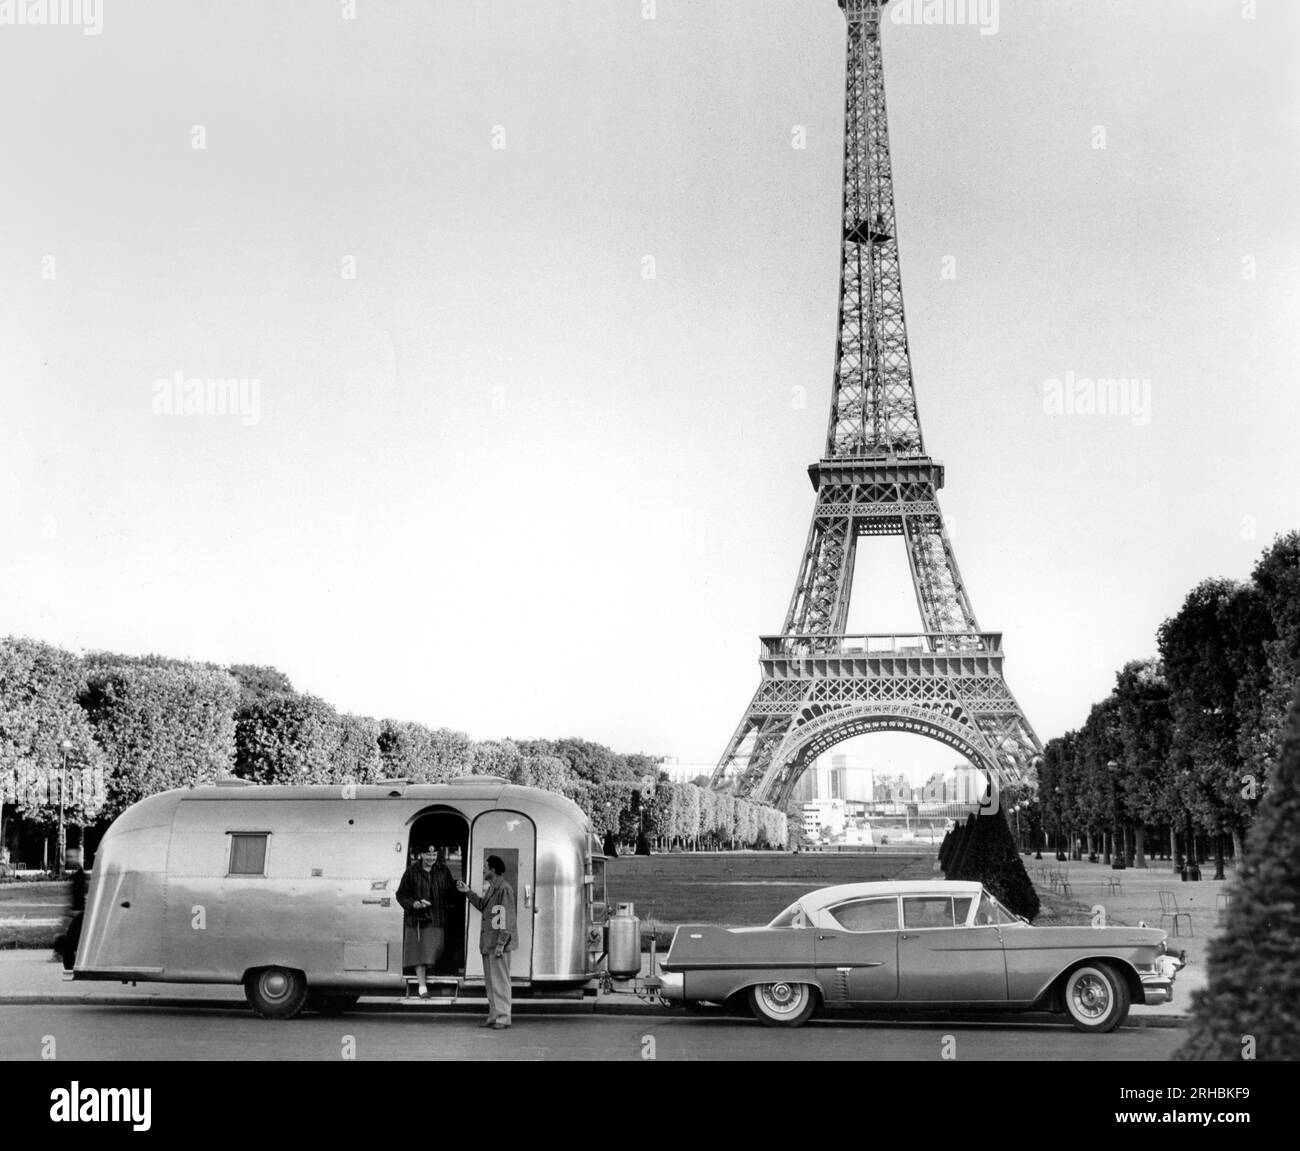 Airstream Trailer parked in front of the Eiffel Tower in Paris, France Stock Photo